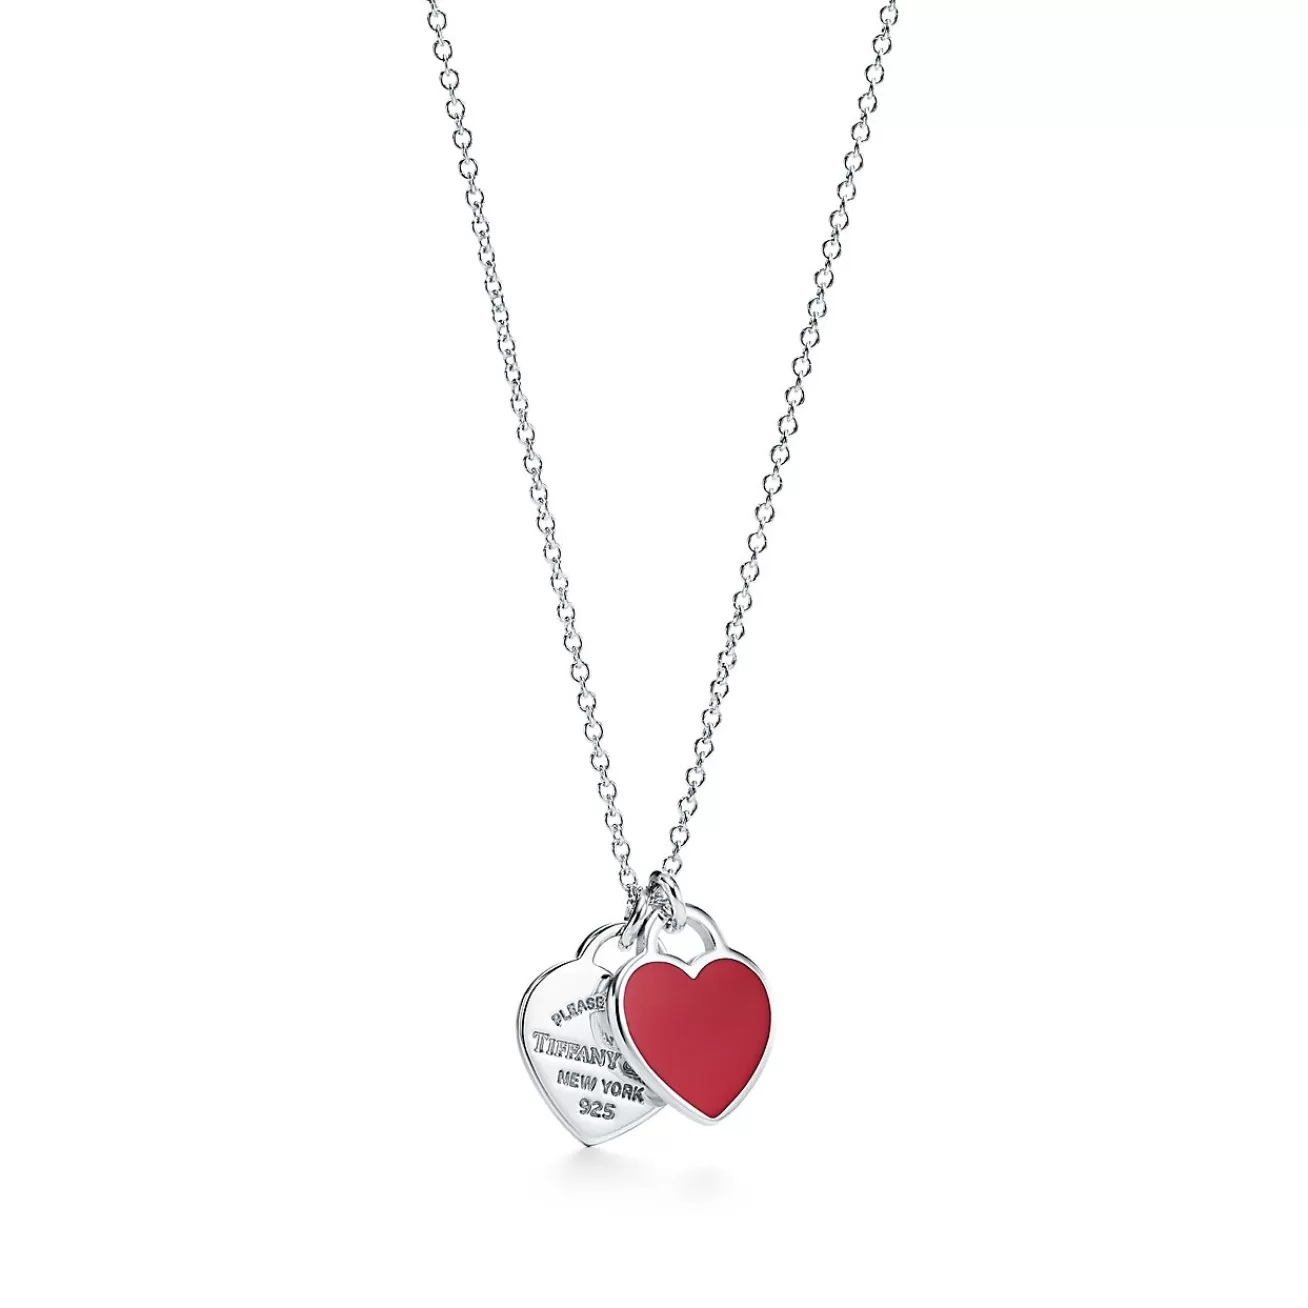 Tiffany & Co. Return to Tiffany® Red Double Heart Tag Pendant in Silver, Small | ^ Necklaces & Pendants | Gifts for Her